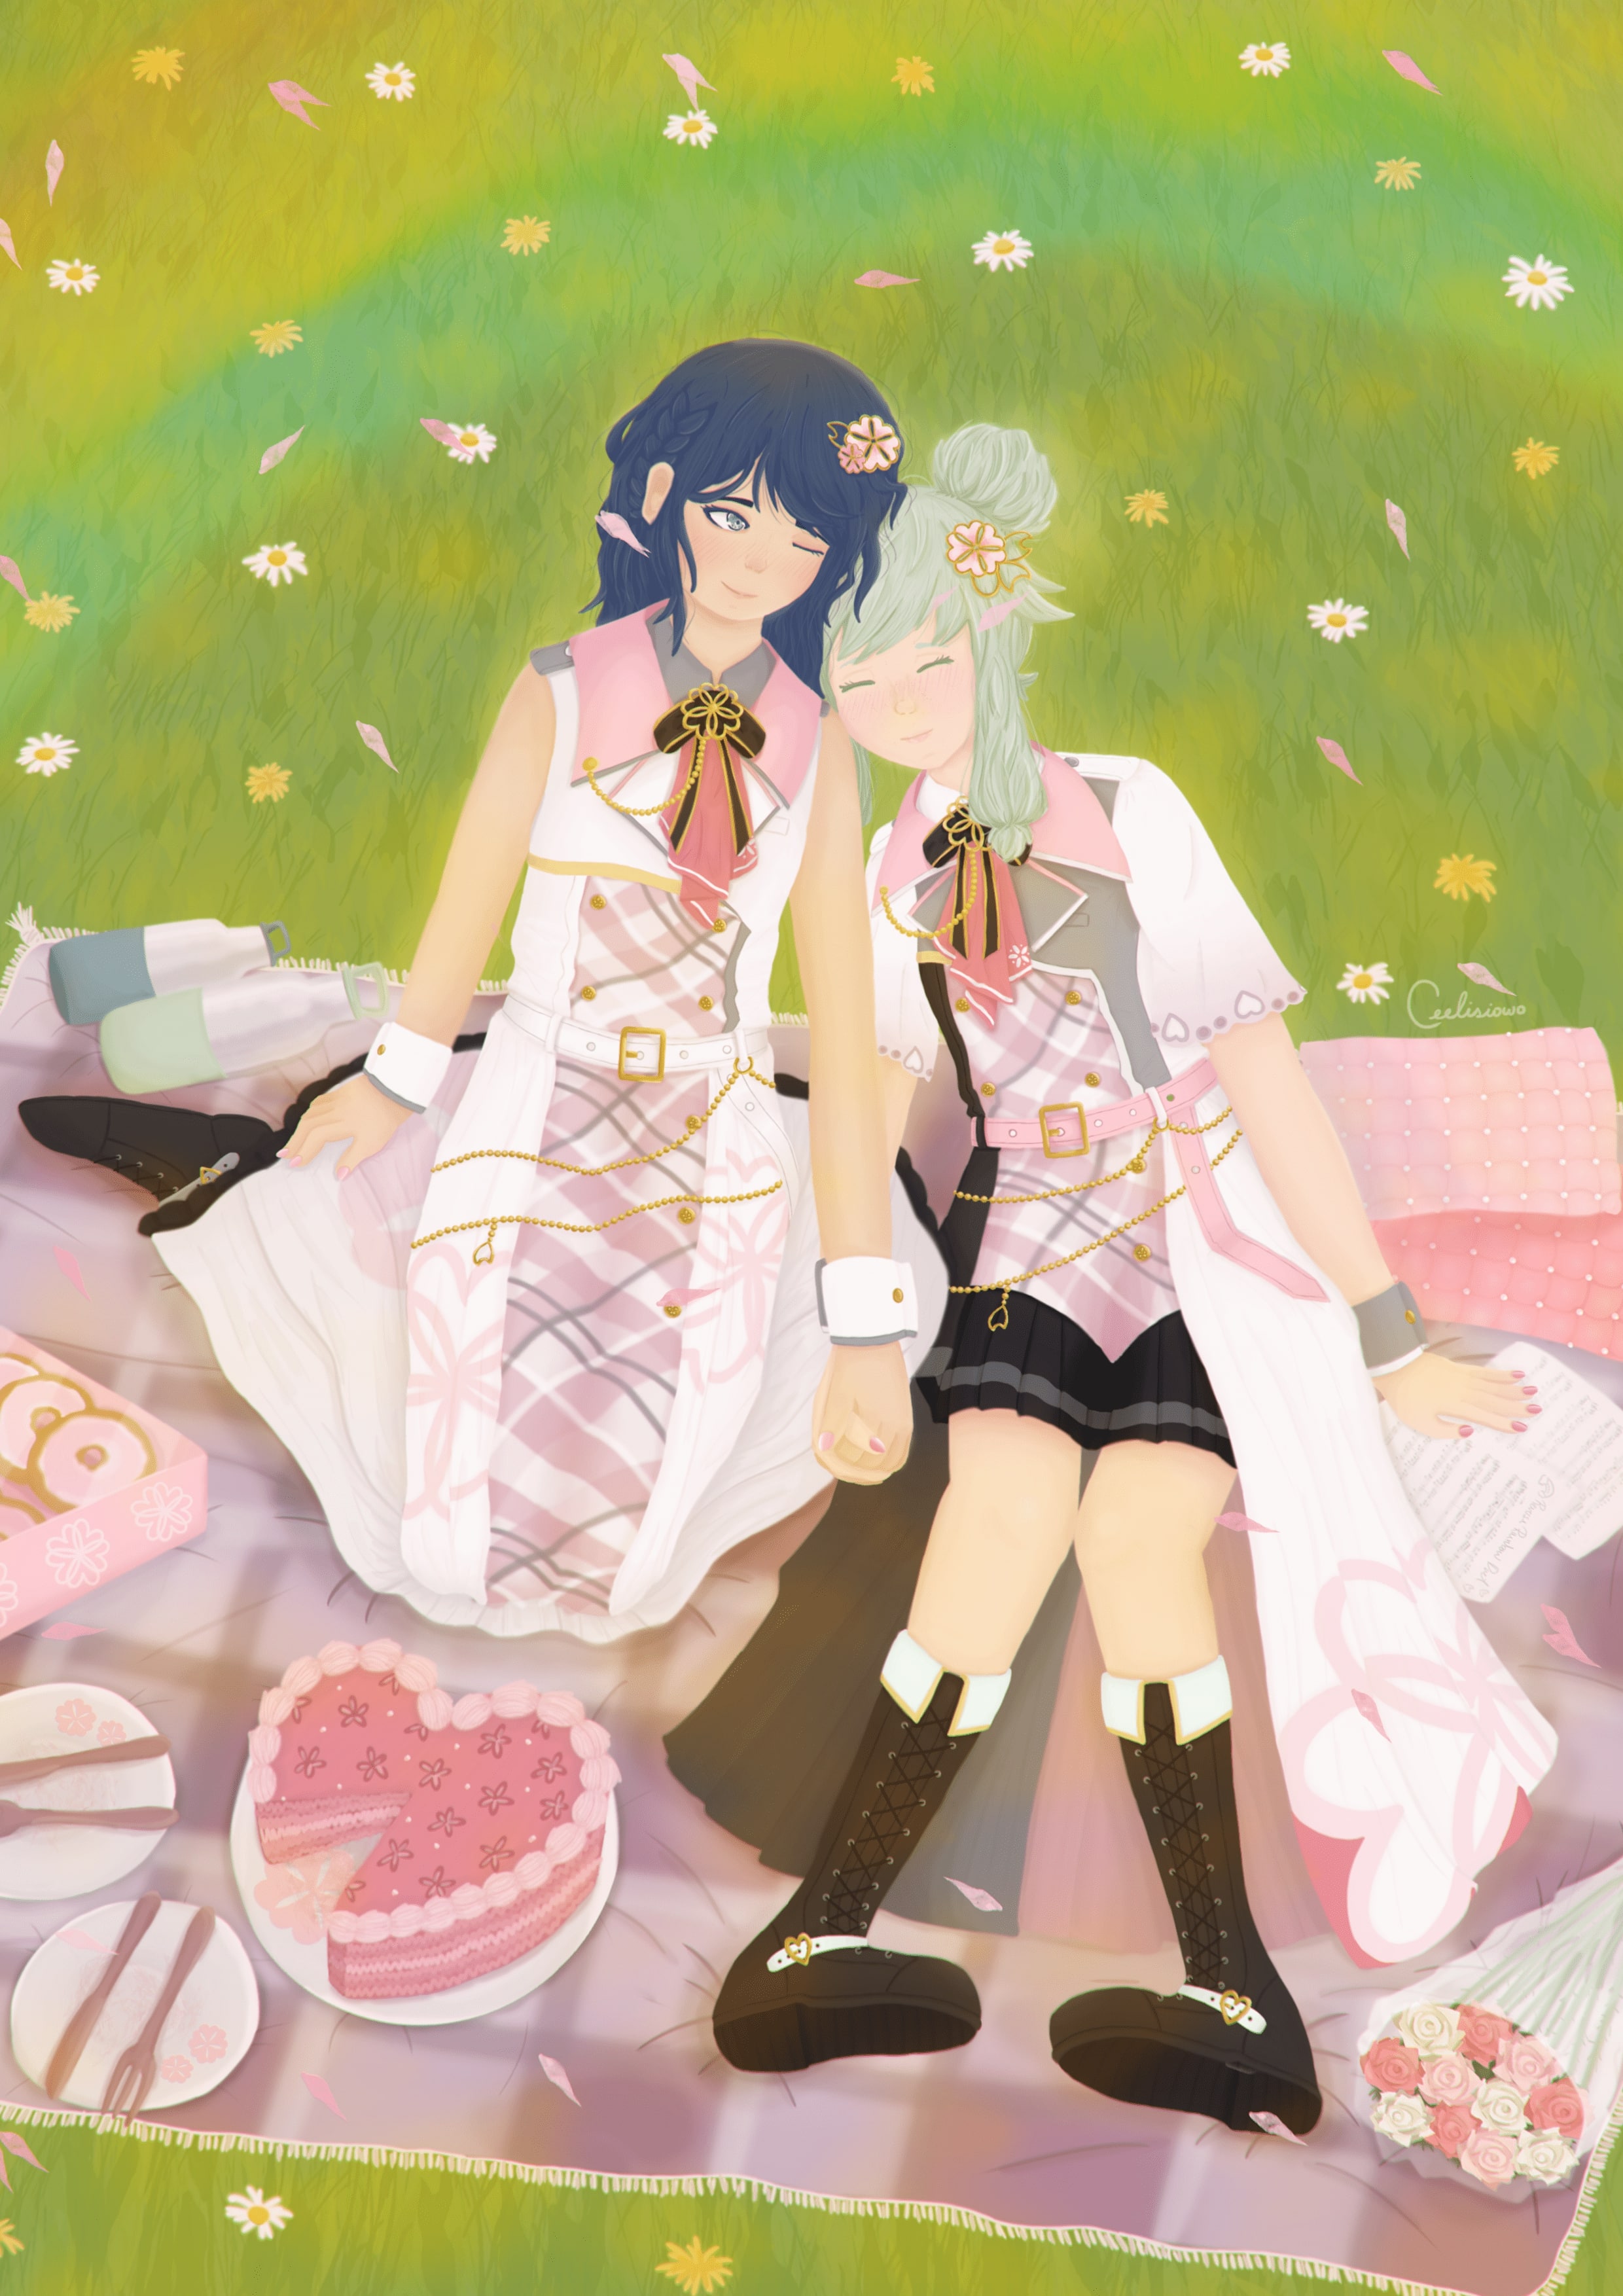 Digital drawing of Ichika and Nene in a romantic picnic.